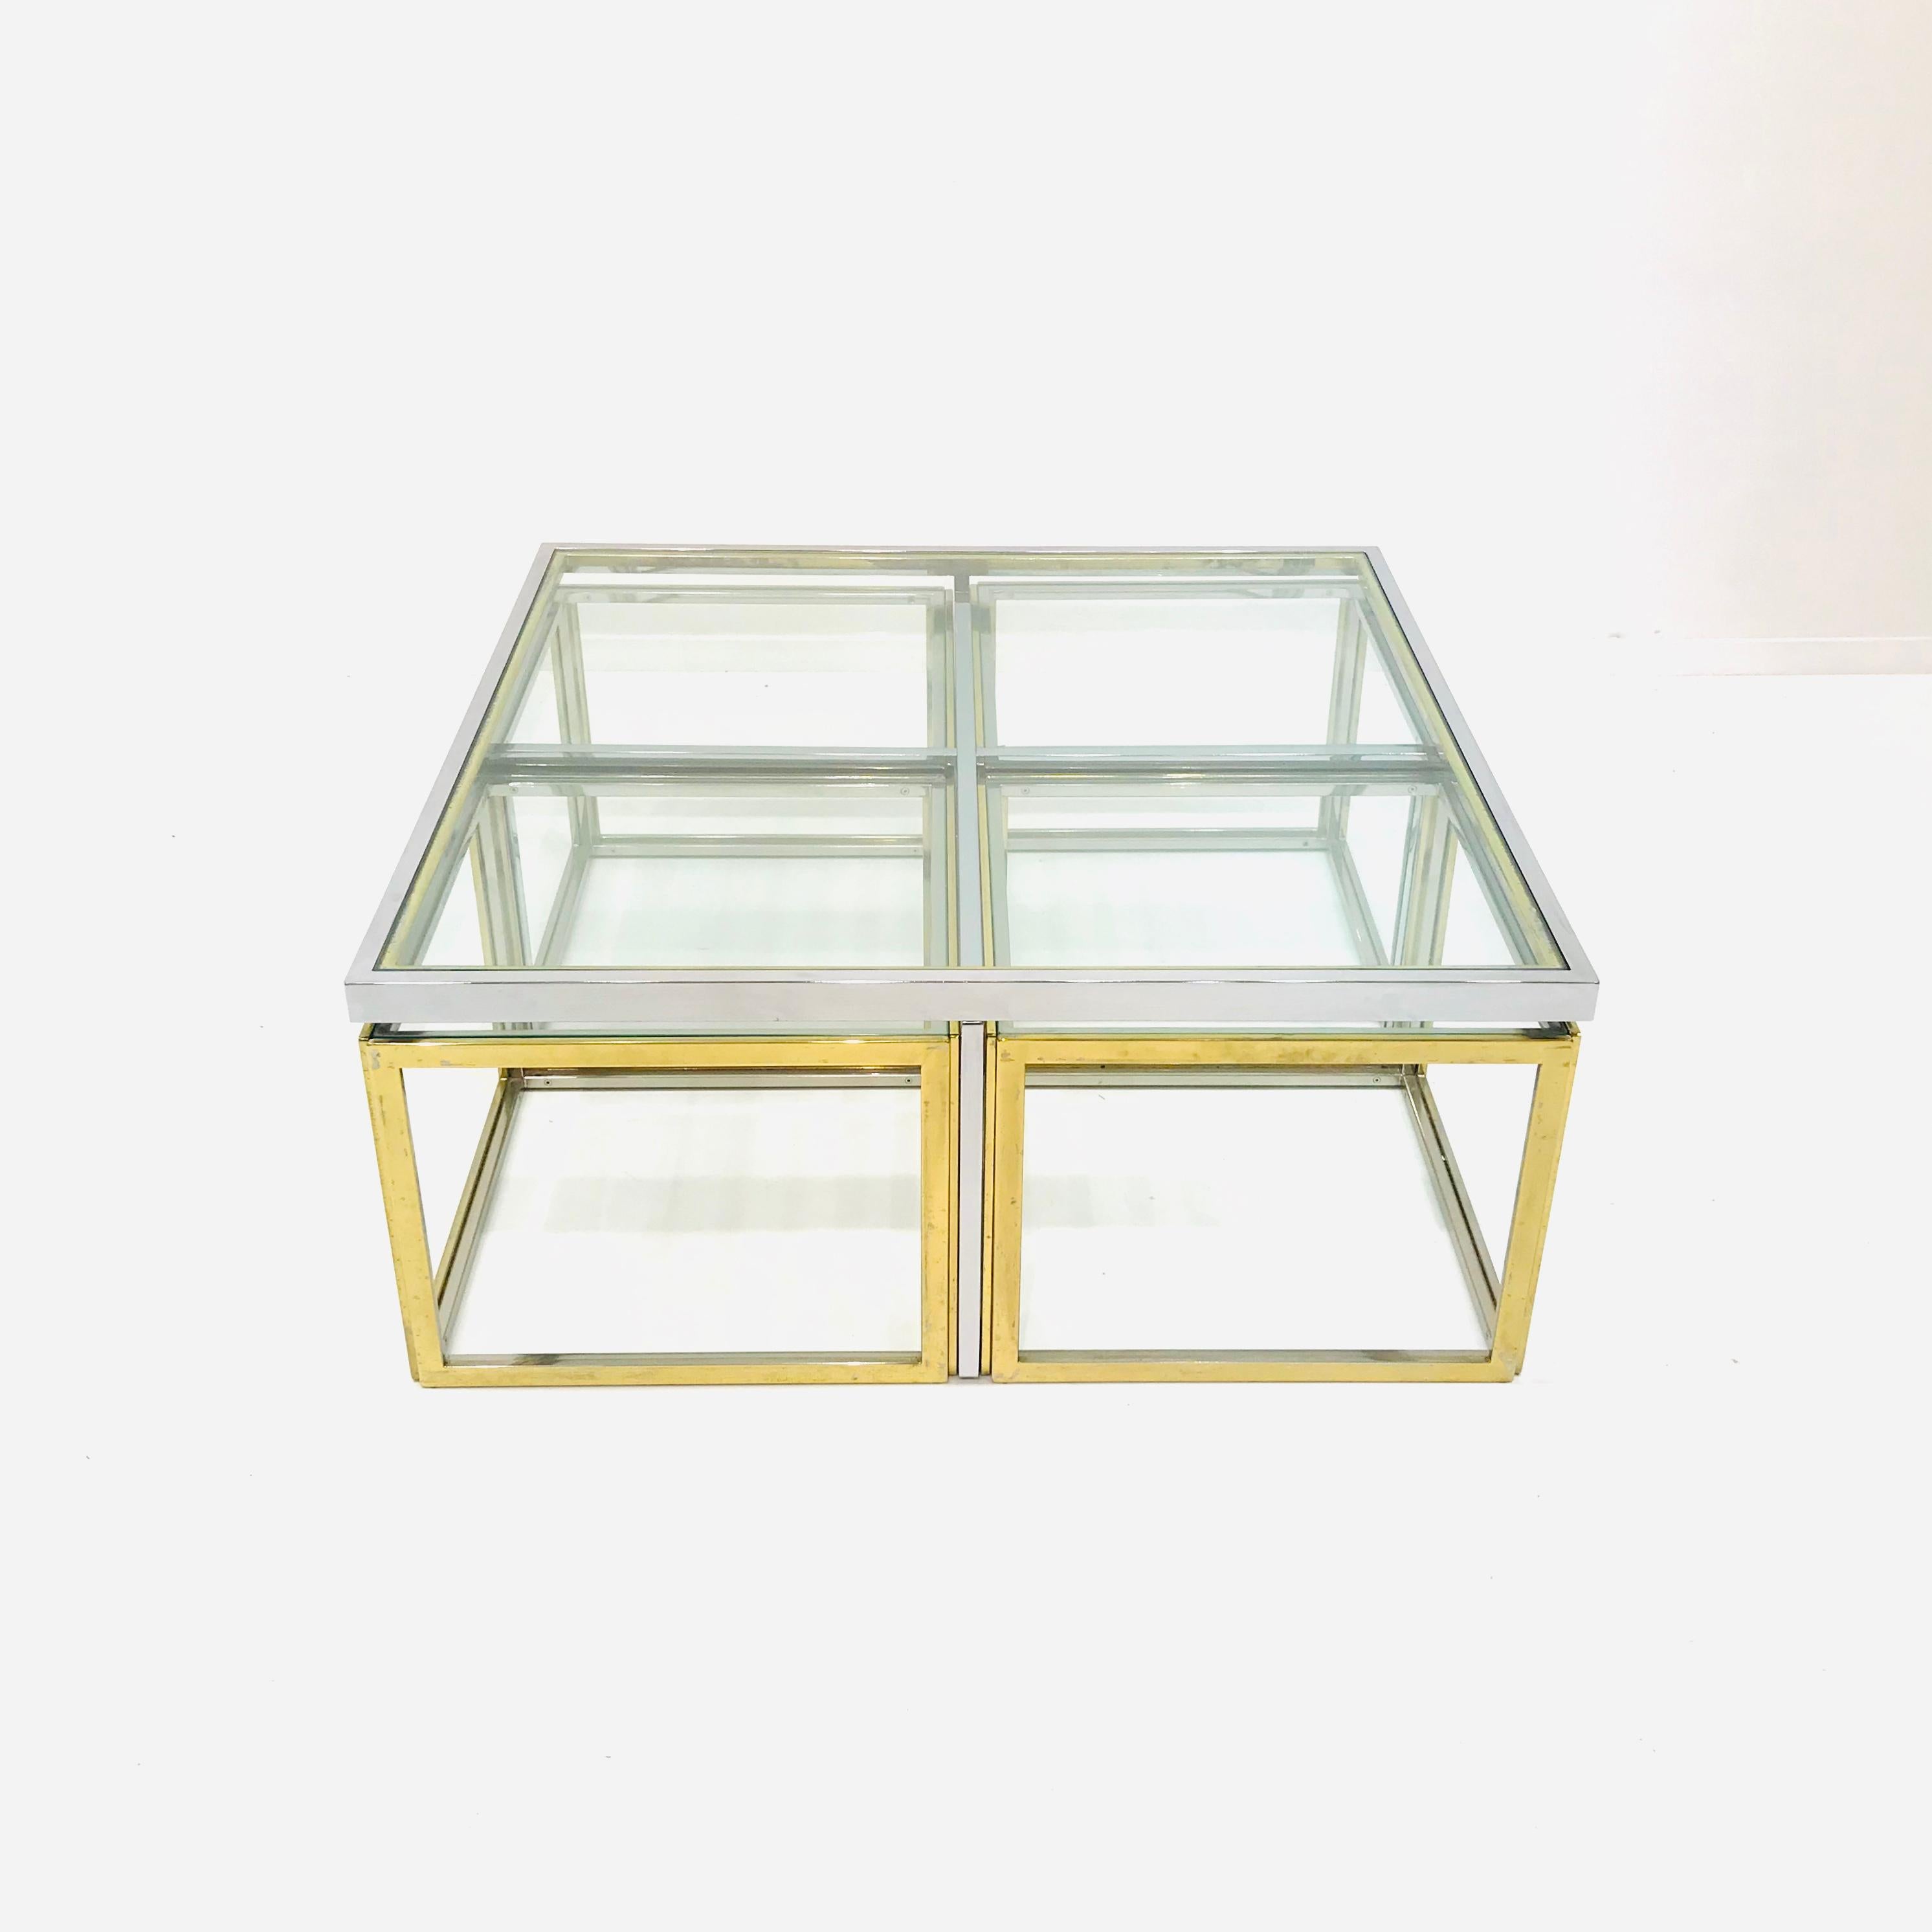 This rare coffee table was designed by Jean Charles in the seventies. The square elegant coffee table was a design for “Maison Charles” in France. This long established Design House was founded in 1908 in Paris. The large square table embraces 4